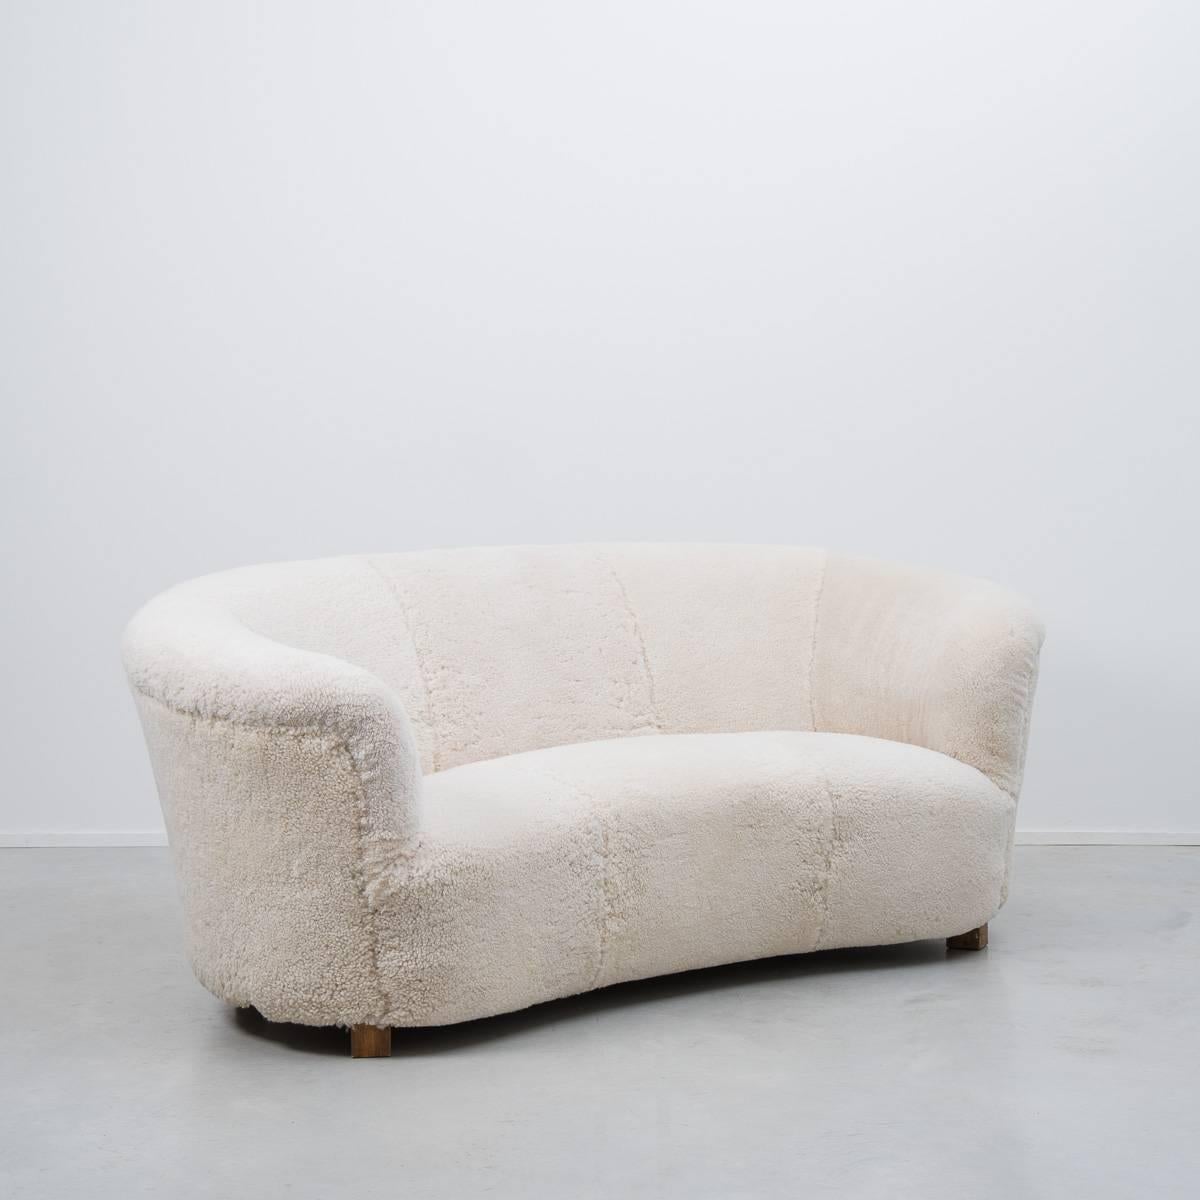 Early 1940s Danish Banana sofa in the manner of architect Flemming Lassen, newly reupholstered in genuine lambs wool. The sofa is of excellent craftsmanship, made by Slagelse Møbelværk, Denmark using proper materials – solid beech, metal springs,